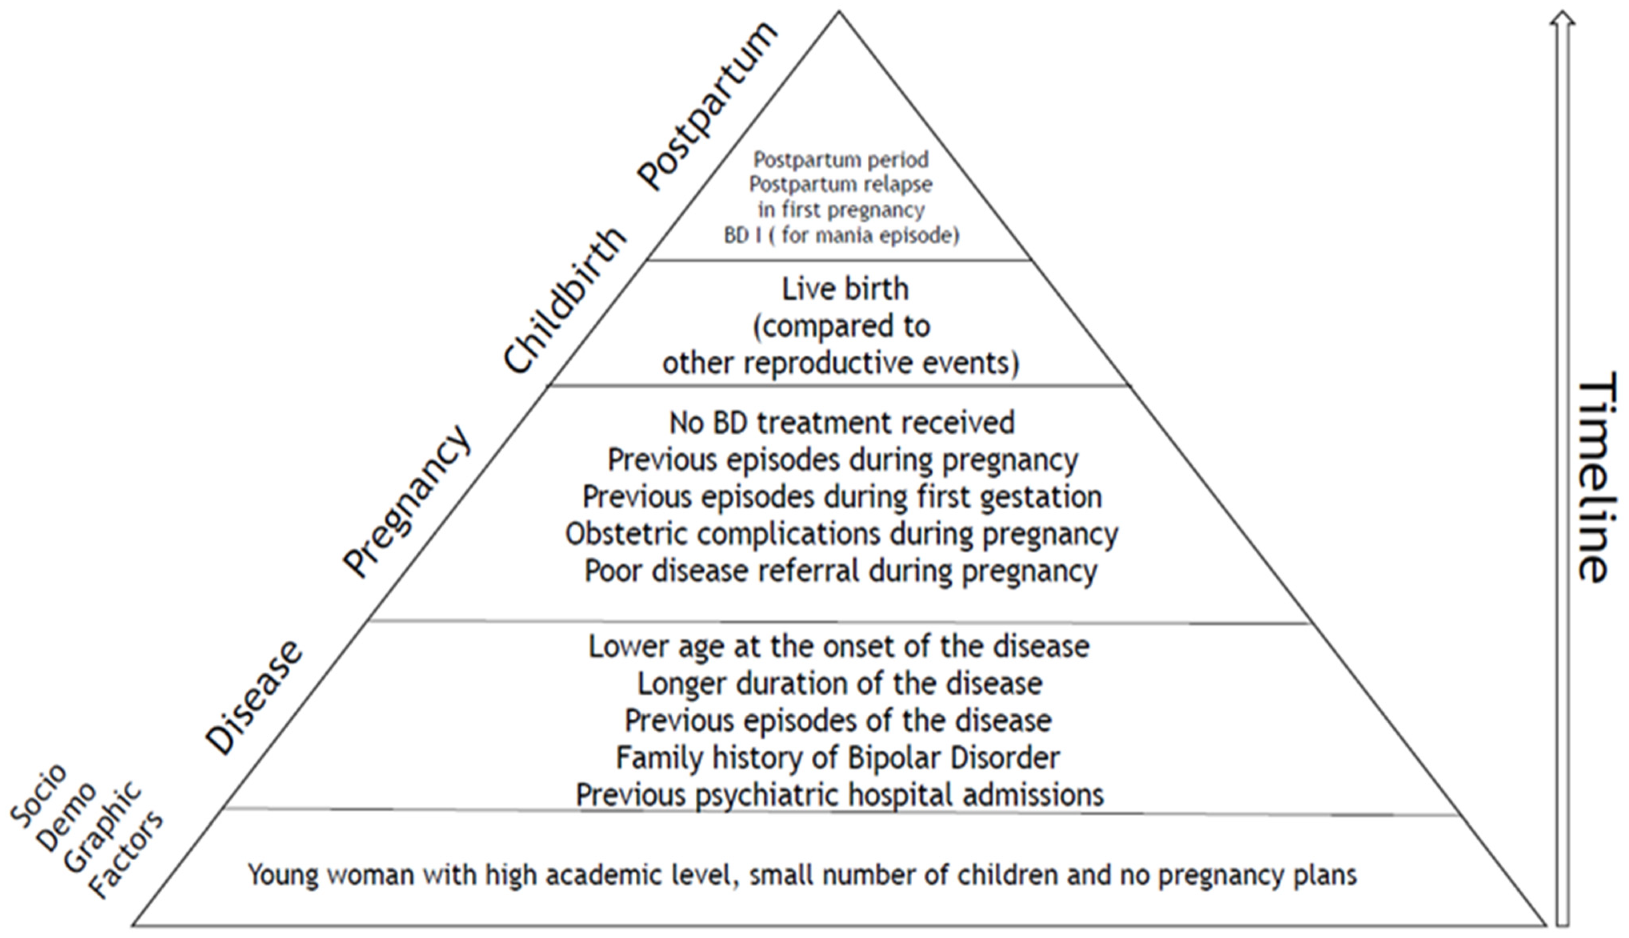 How to Manage Bipolar Disorder During Pregnancy